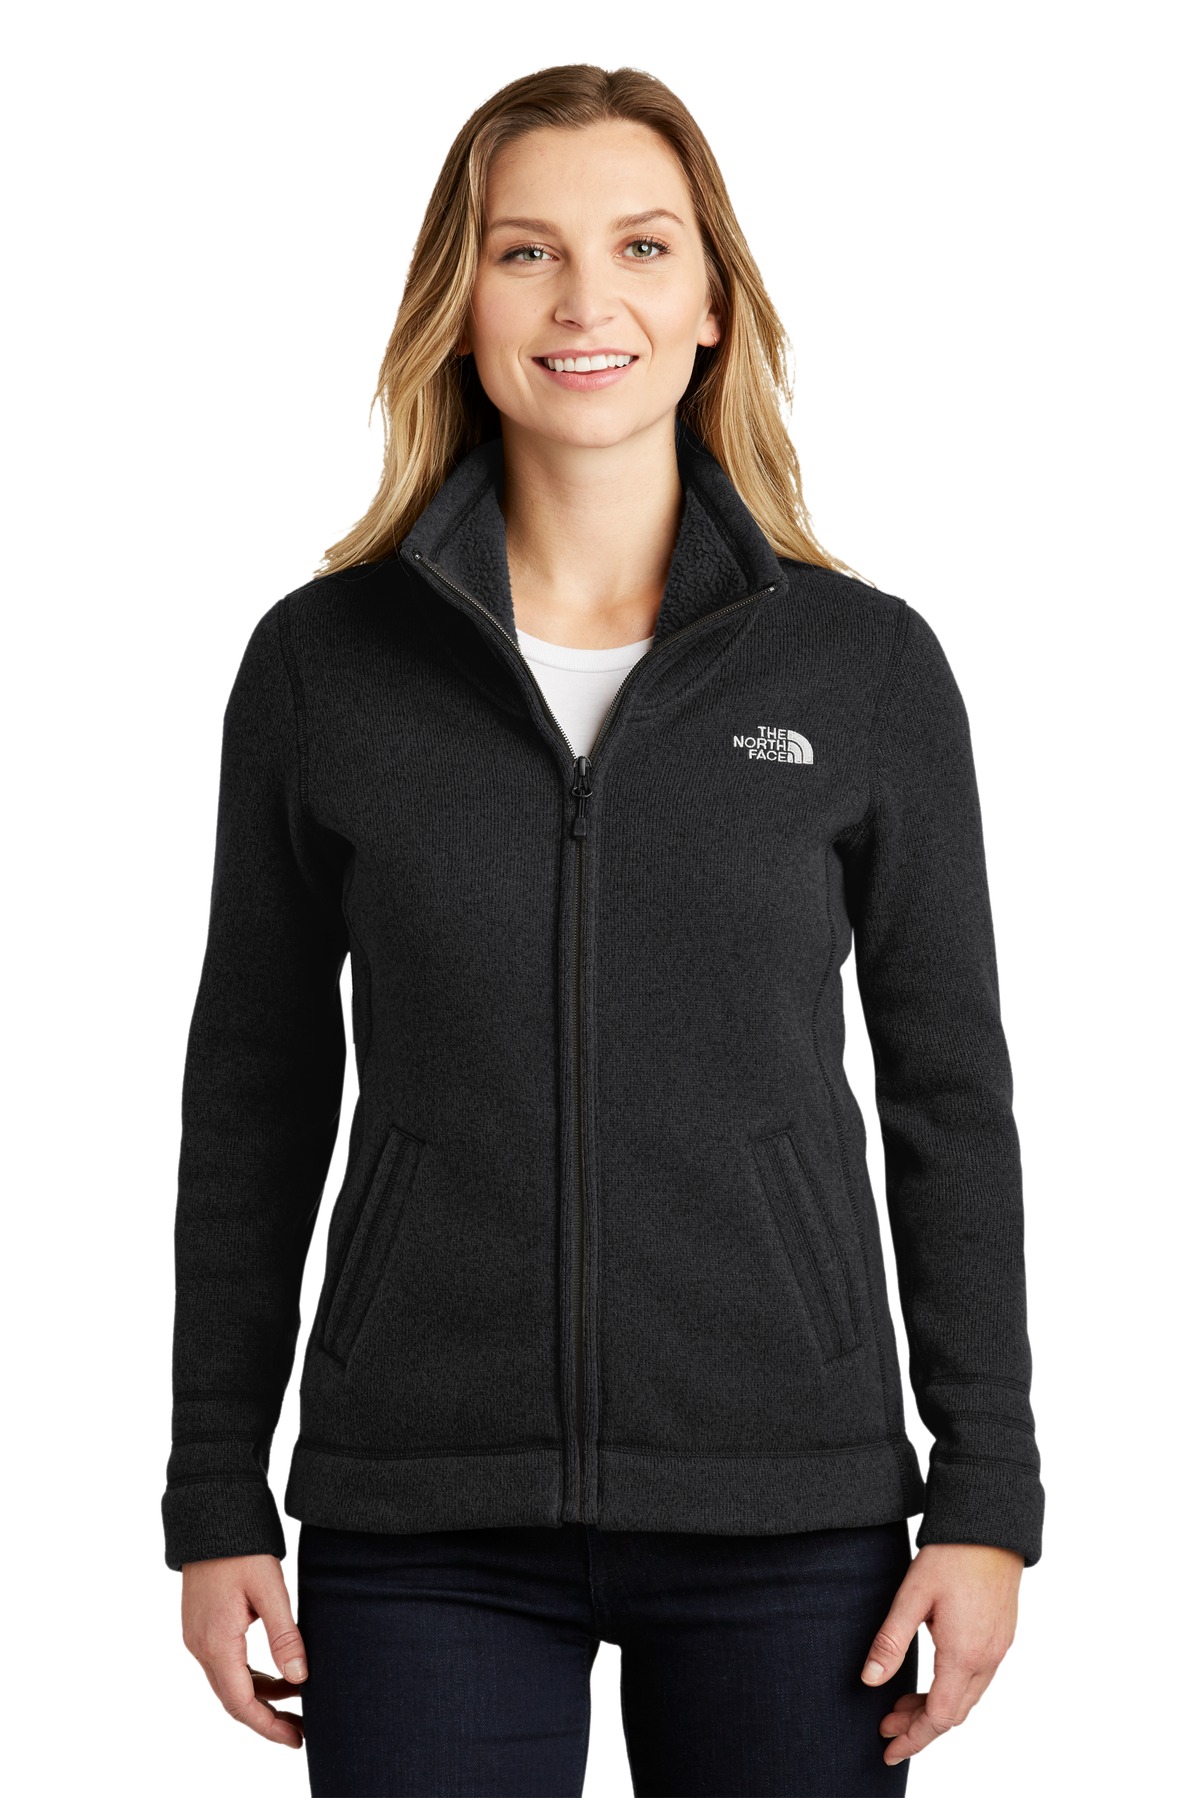 The North Face Ladies Outerwear,Sweatshirts&Fleece for Corporate Hospitality ® Ladies Sweater Fleece Jacket.-The North Face